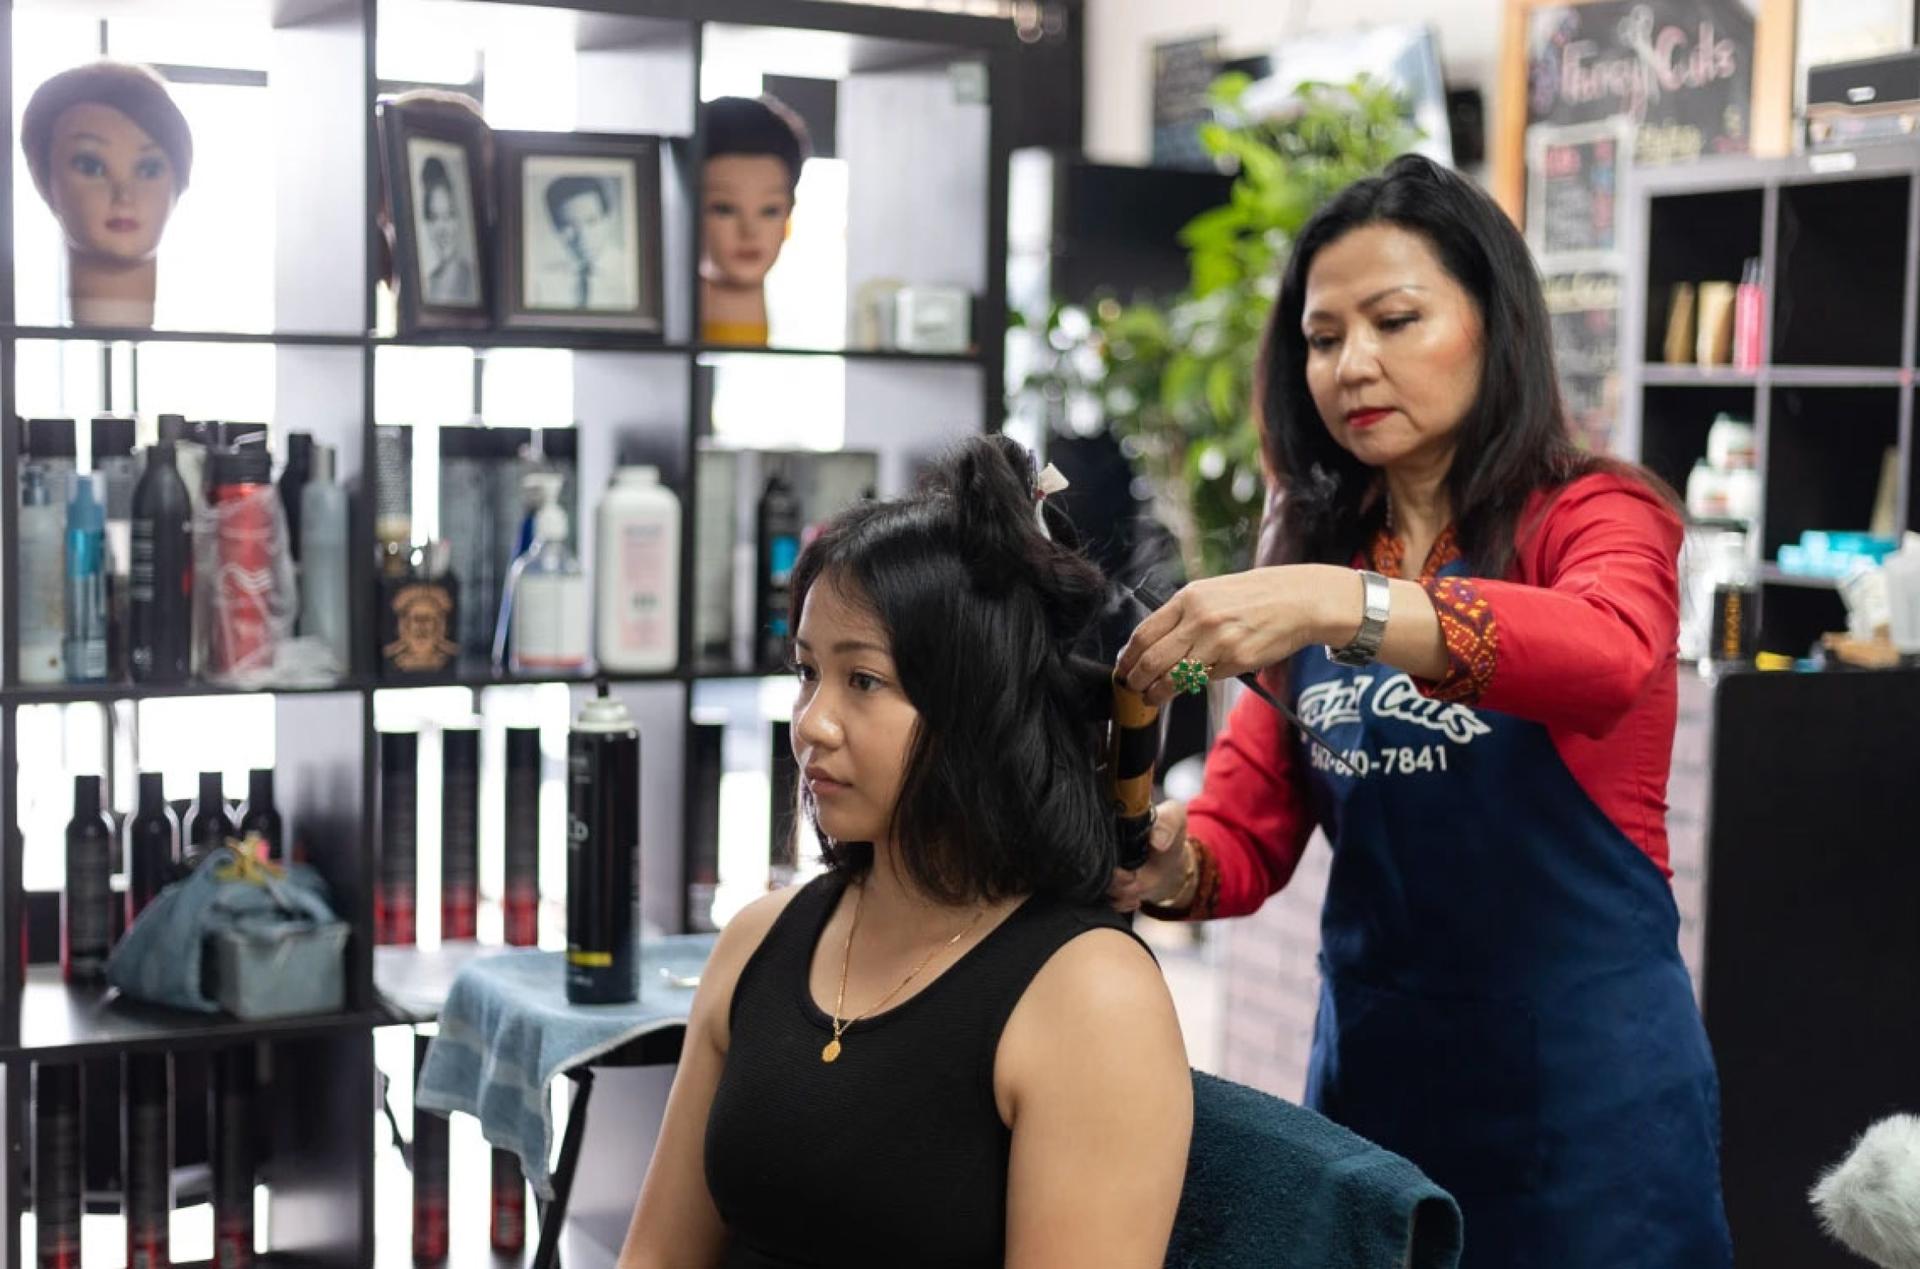 Ariya Tok prepares for her graduation ceremony by getting her hair done by her mother Dannaly Tok.